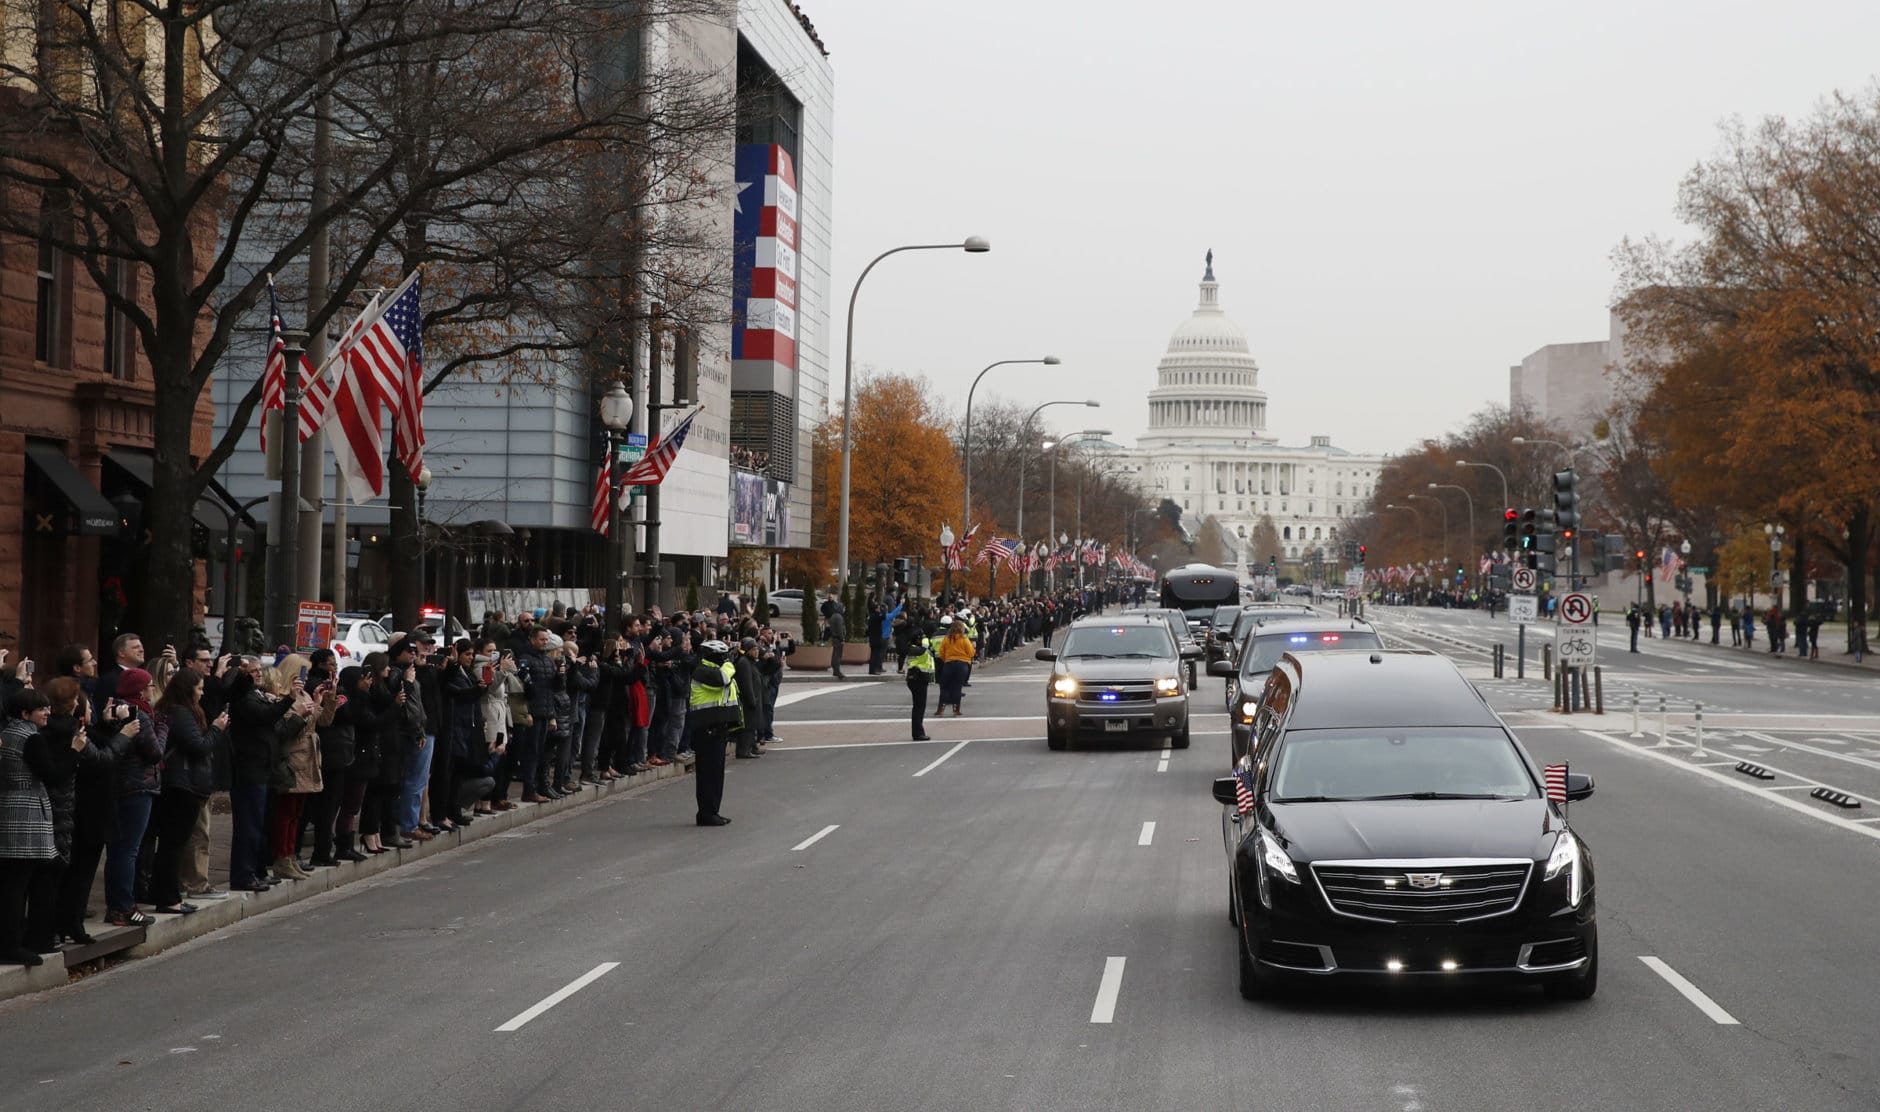 People line Pennsylvania Ave. as the hearse passes by carrying the flag-draped casket of former President George H.W. Bush as it drives away from the Capitol heading to a State Funeral at the National Cathedral on December 5, 2018 in Washington, DC. President Bush will be buried at his final resting place at the George H.W. Bush Presidential Library at Texas A&amp;M University in College Station, Texas. A WWII combat veteran, Bush served as a member of Congress from Texas, ambassador to the United Nations, director of the CIA, vice president and 41st president of the United States.  (Photo by Alex Brandon - Pool/Getty Images)